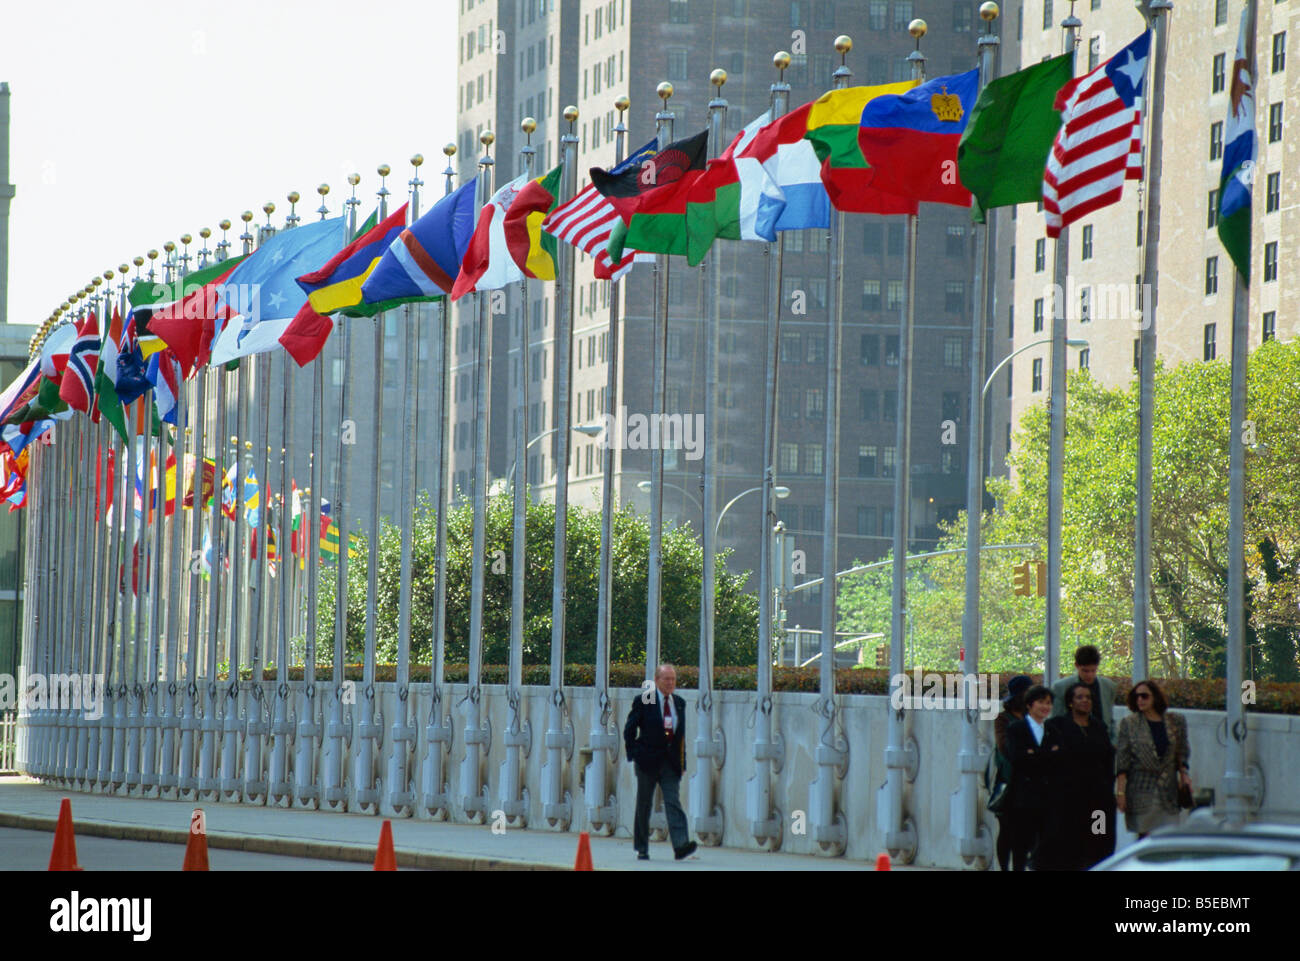 Line of flags outside the United Nations Building, Manhattan, New York City, USA, North America Stock Photo